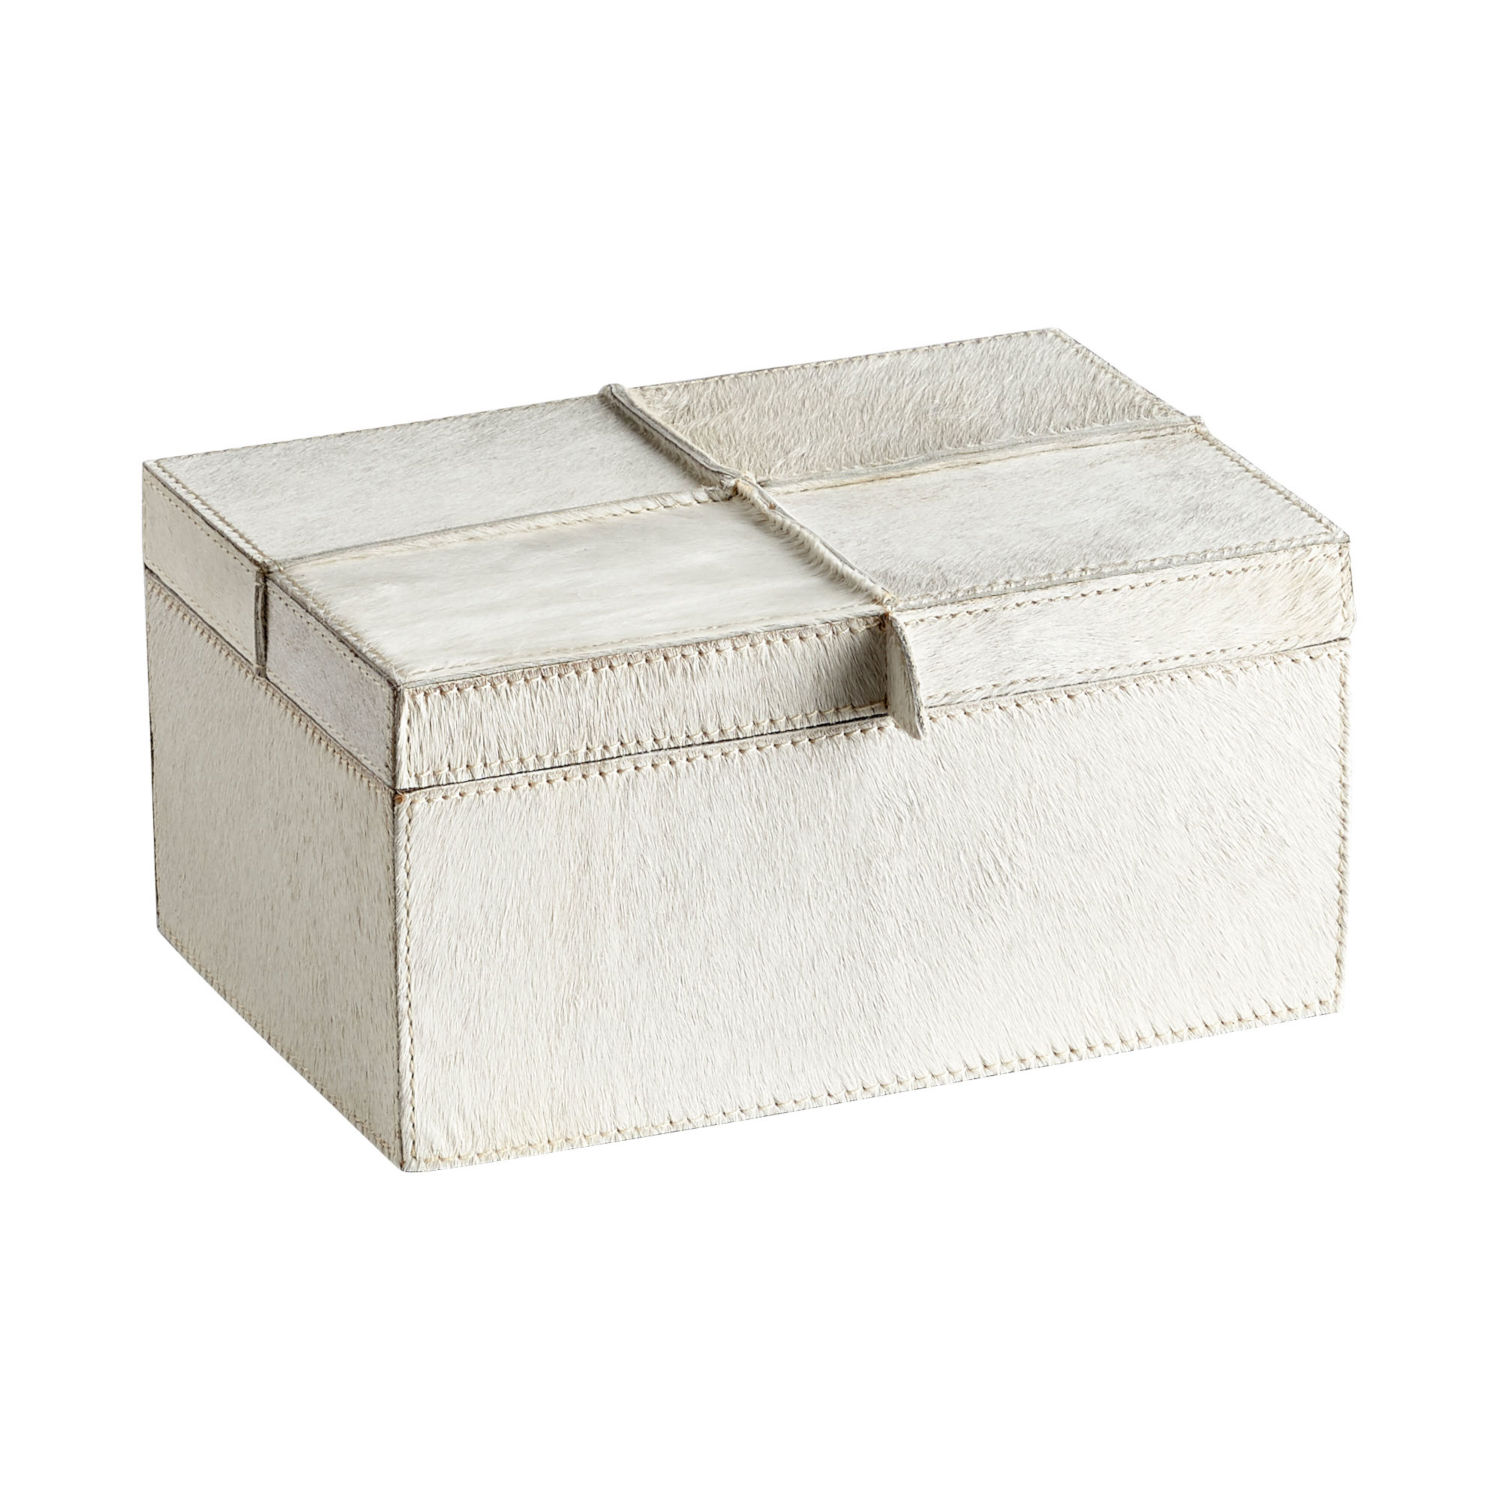 Decorative Boxes Category